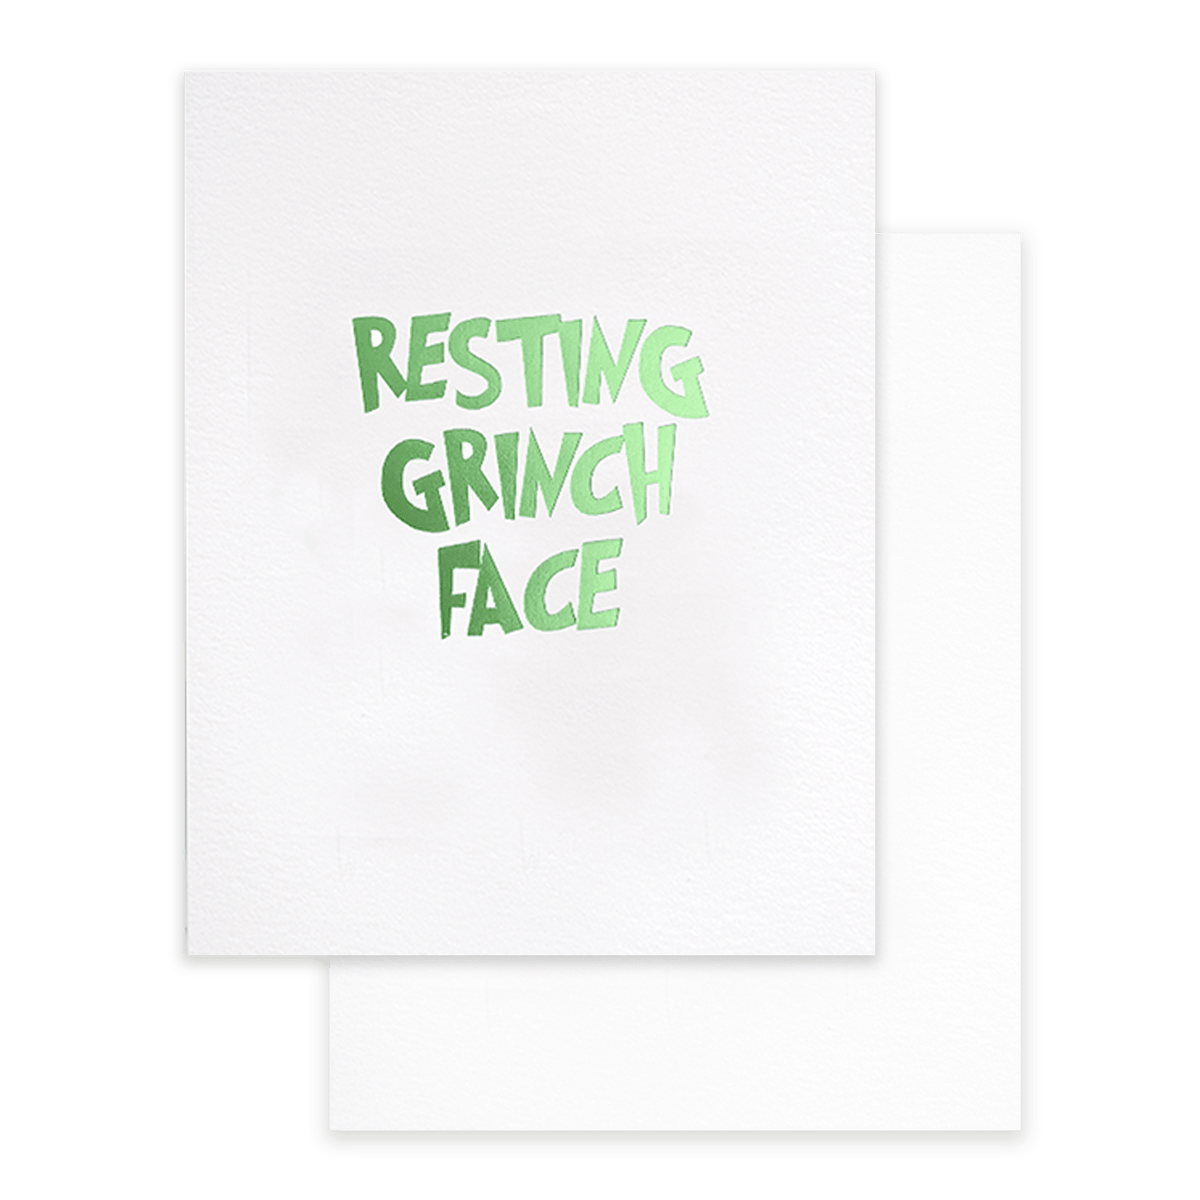 Resting Grinch Face card